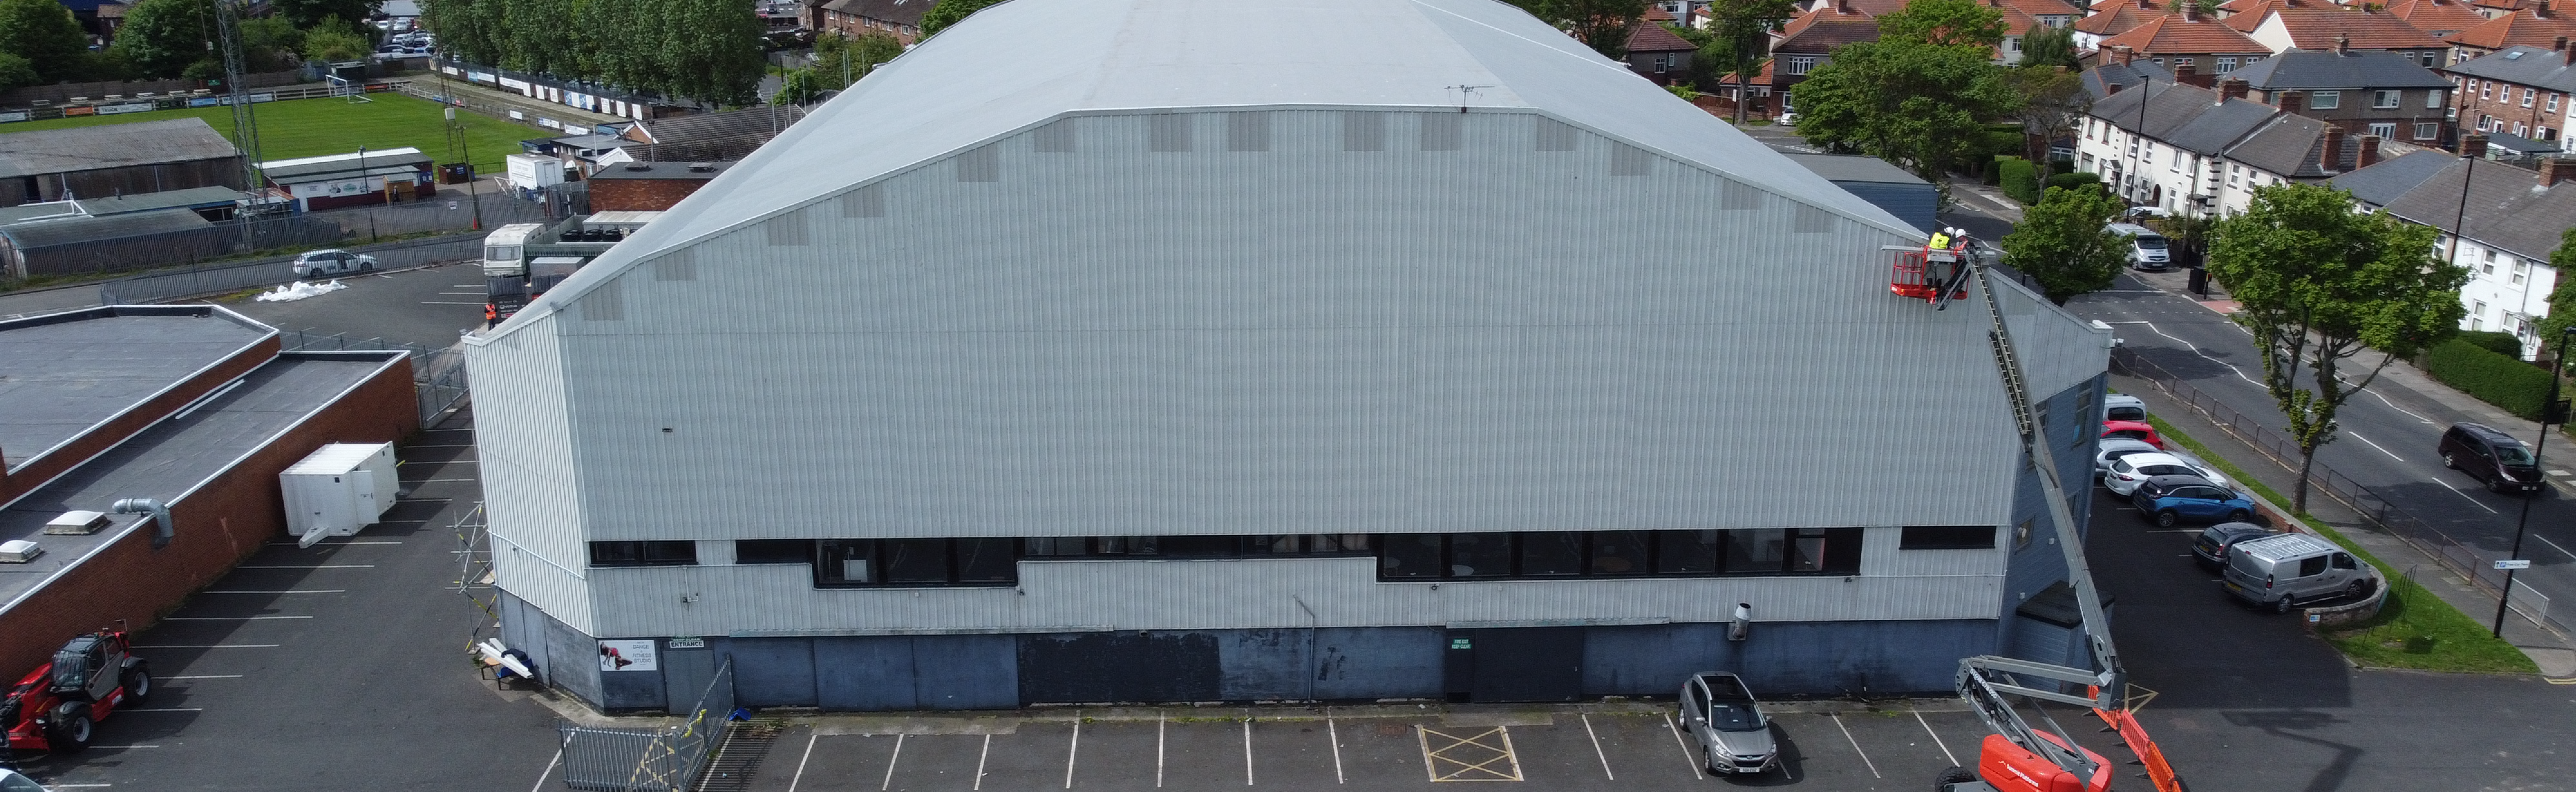 Whitley Bay Ice Rink Refurb - Banner (1920 x 590).png